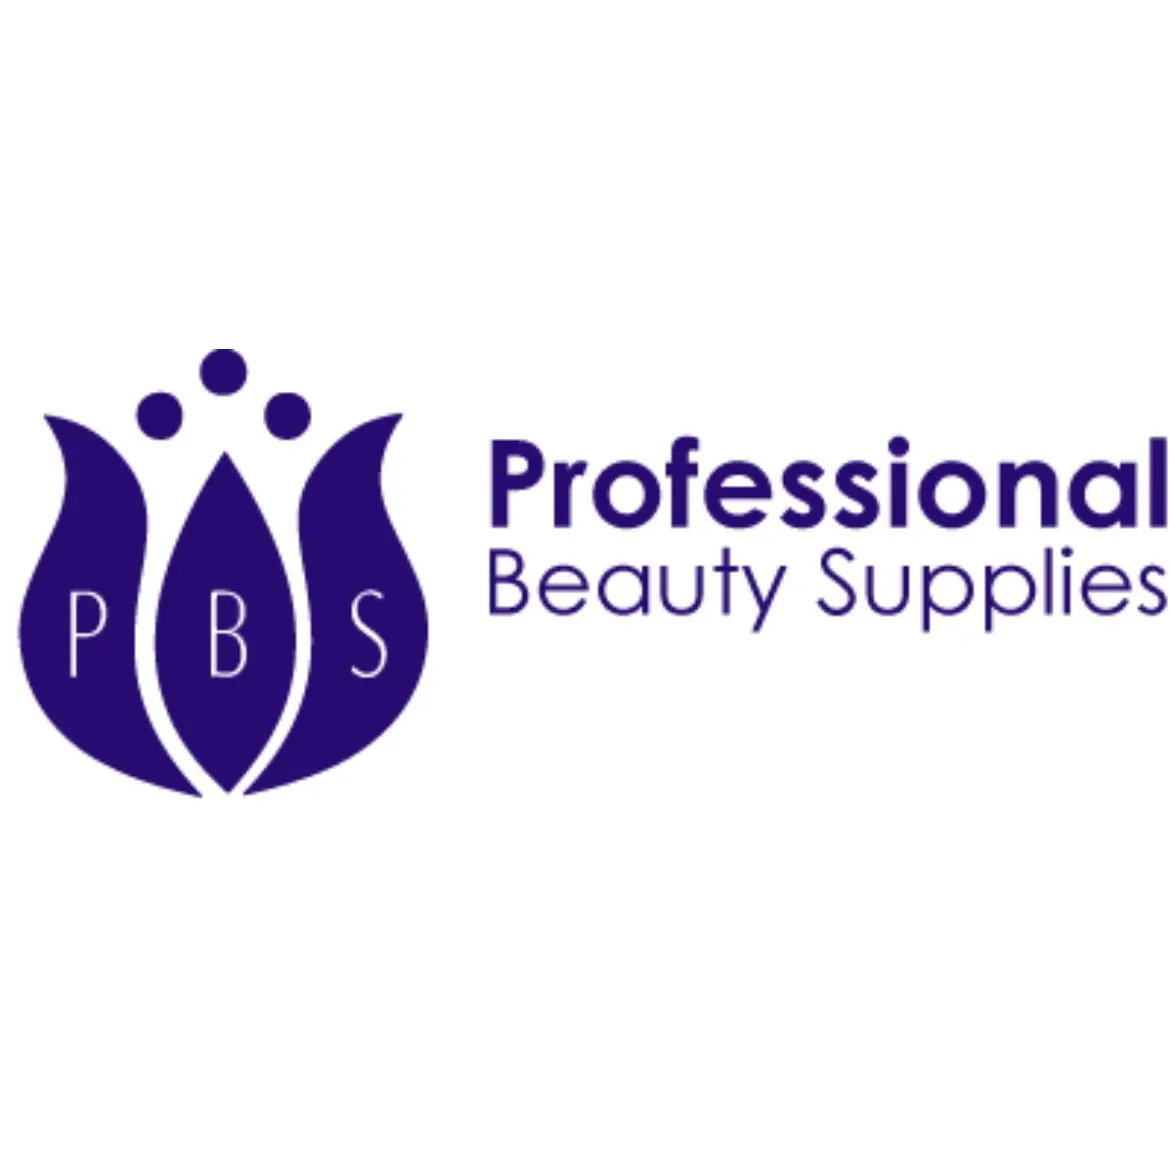 Professional Beauty Systems